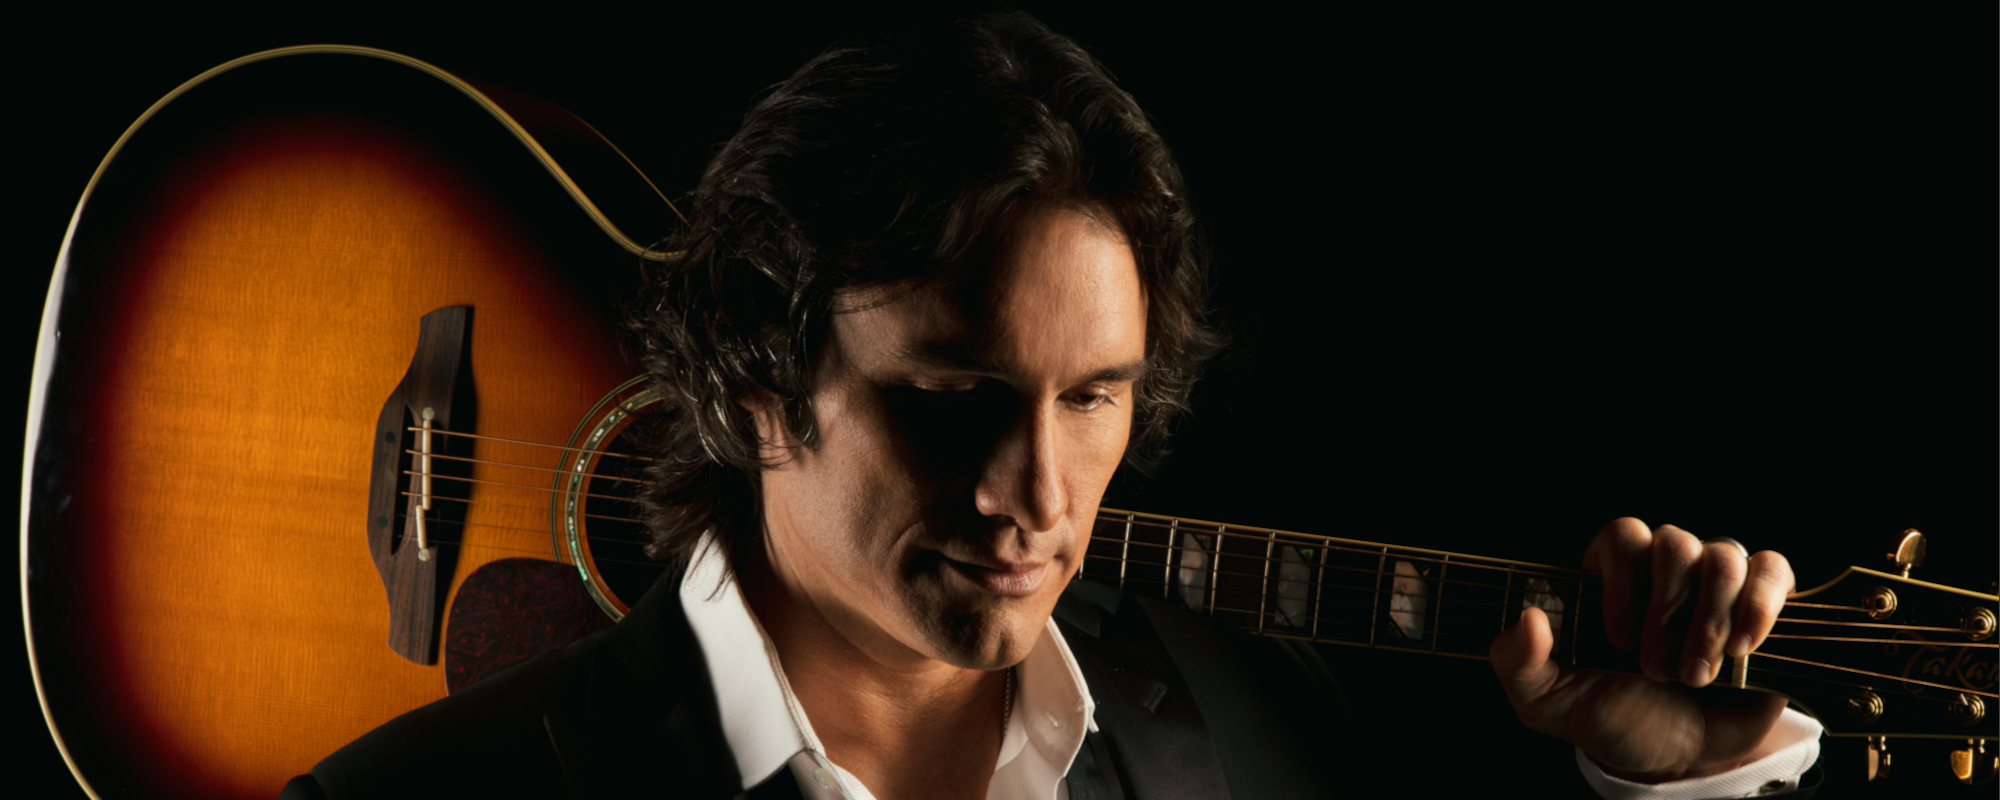 Off the Record Live: Joe Nichols Keeps it Country on New Album ‘Good Day For Living’